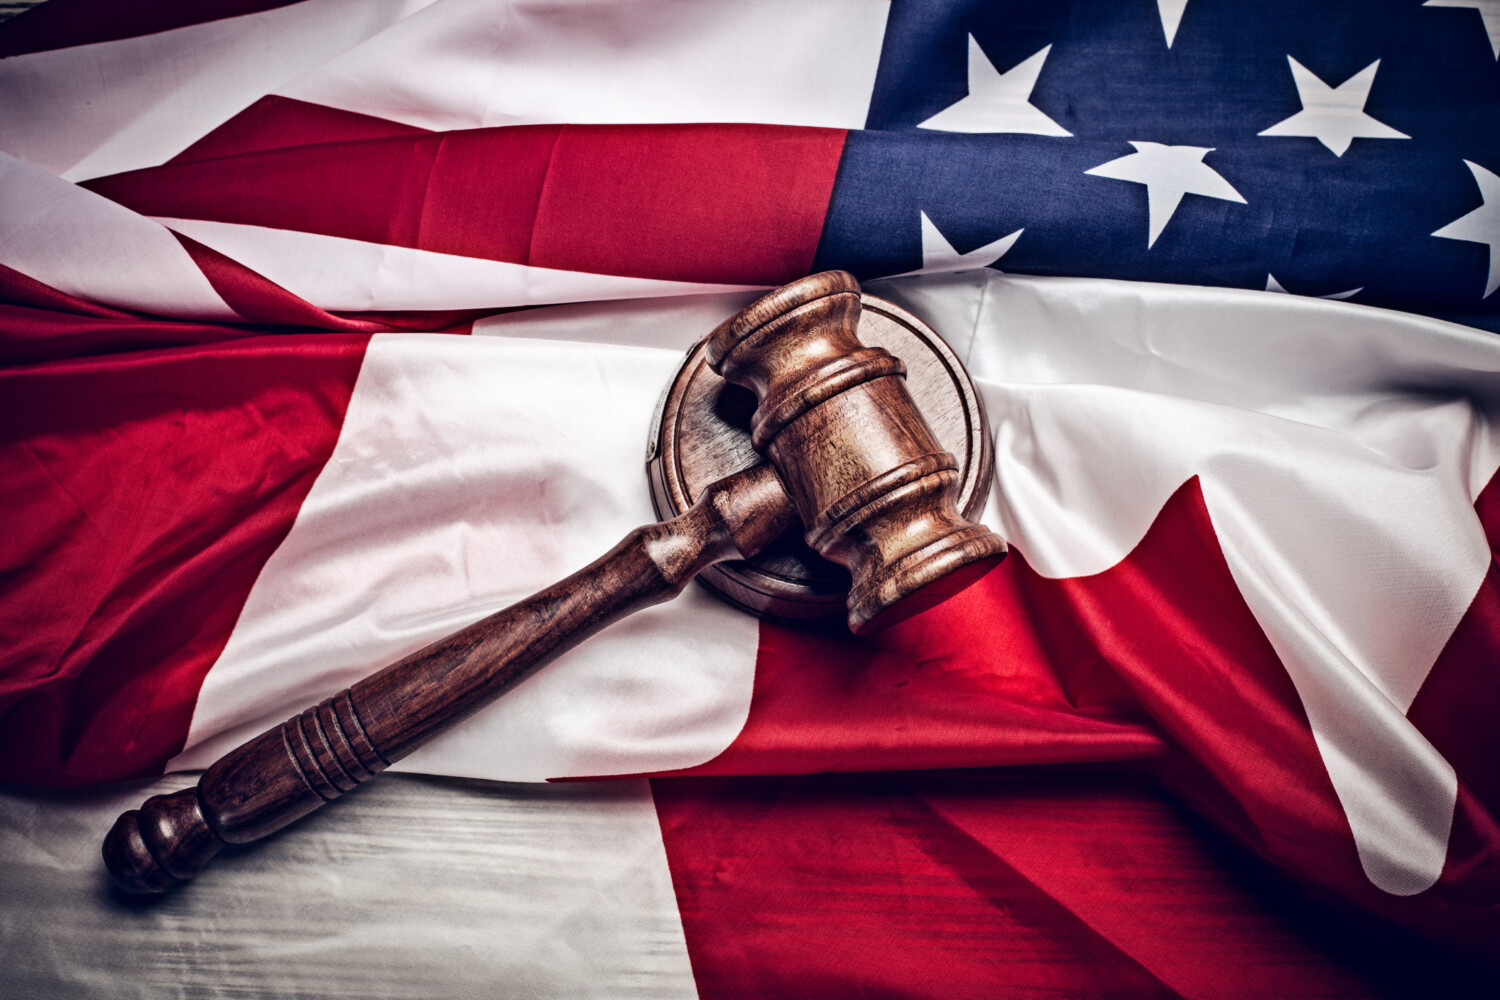 stock-photo-the-judge-gavel-and-background-with-usa-flag-531398749